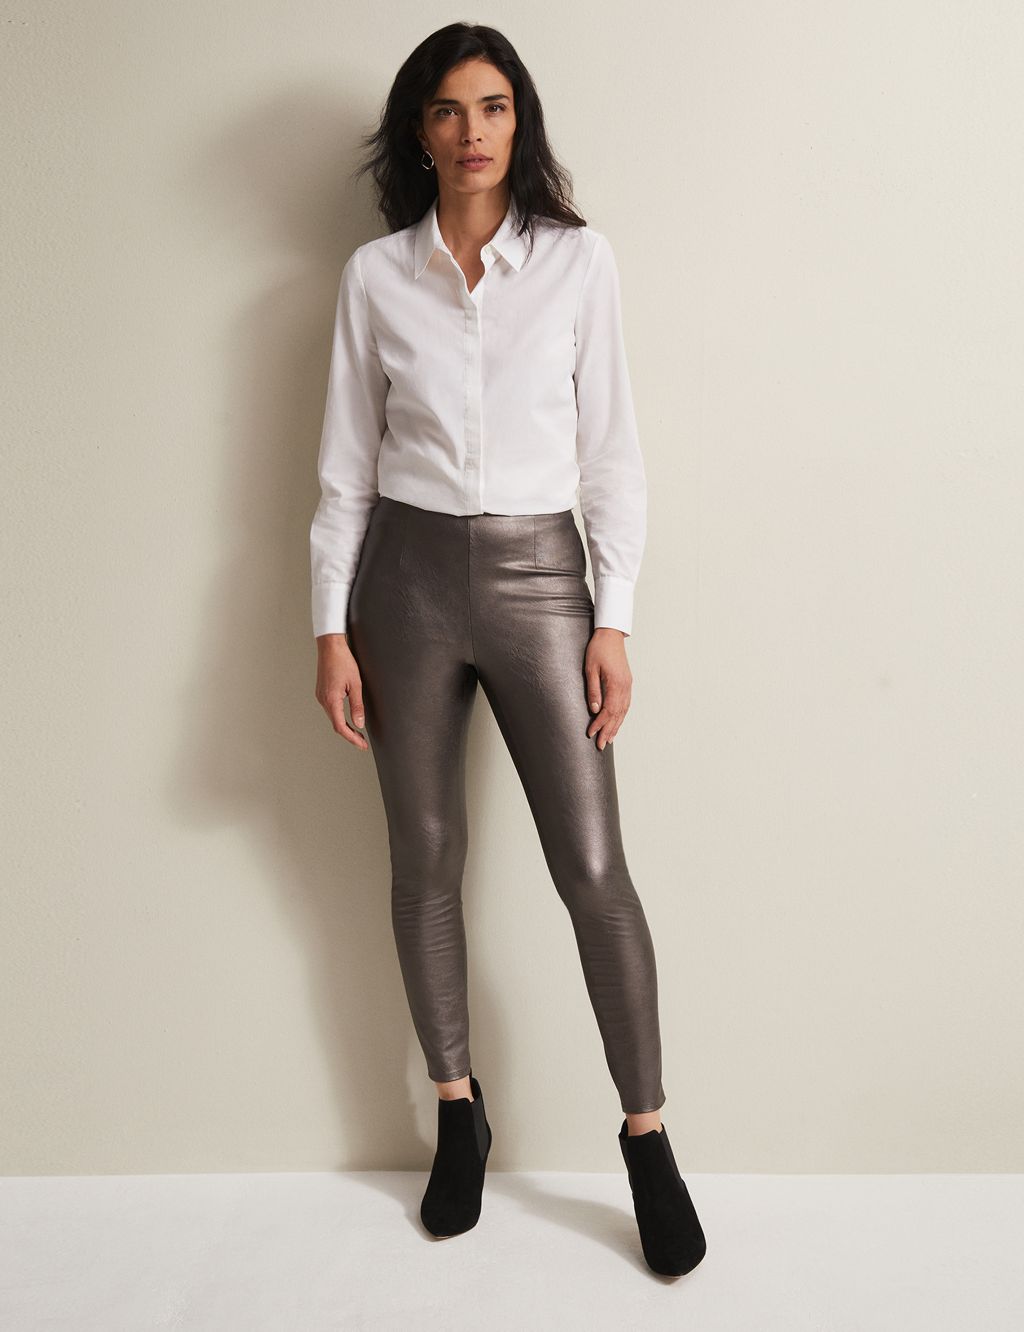 Trousers, 'Bavi' Coated Faux Leather Jeggings